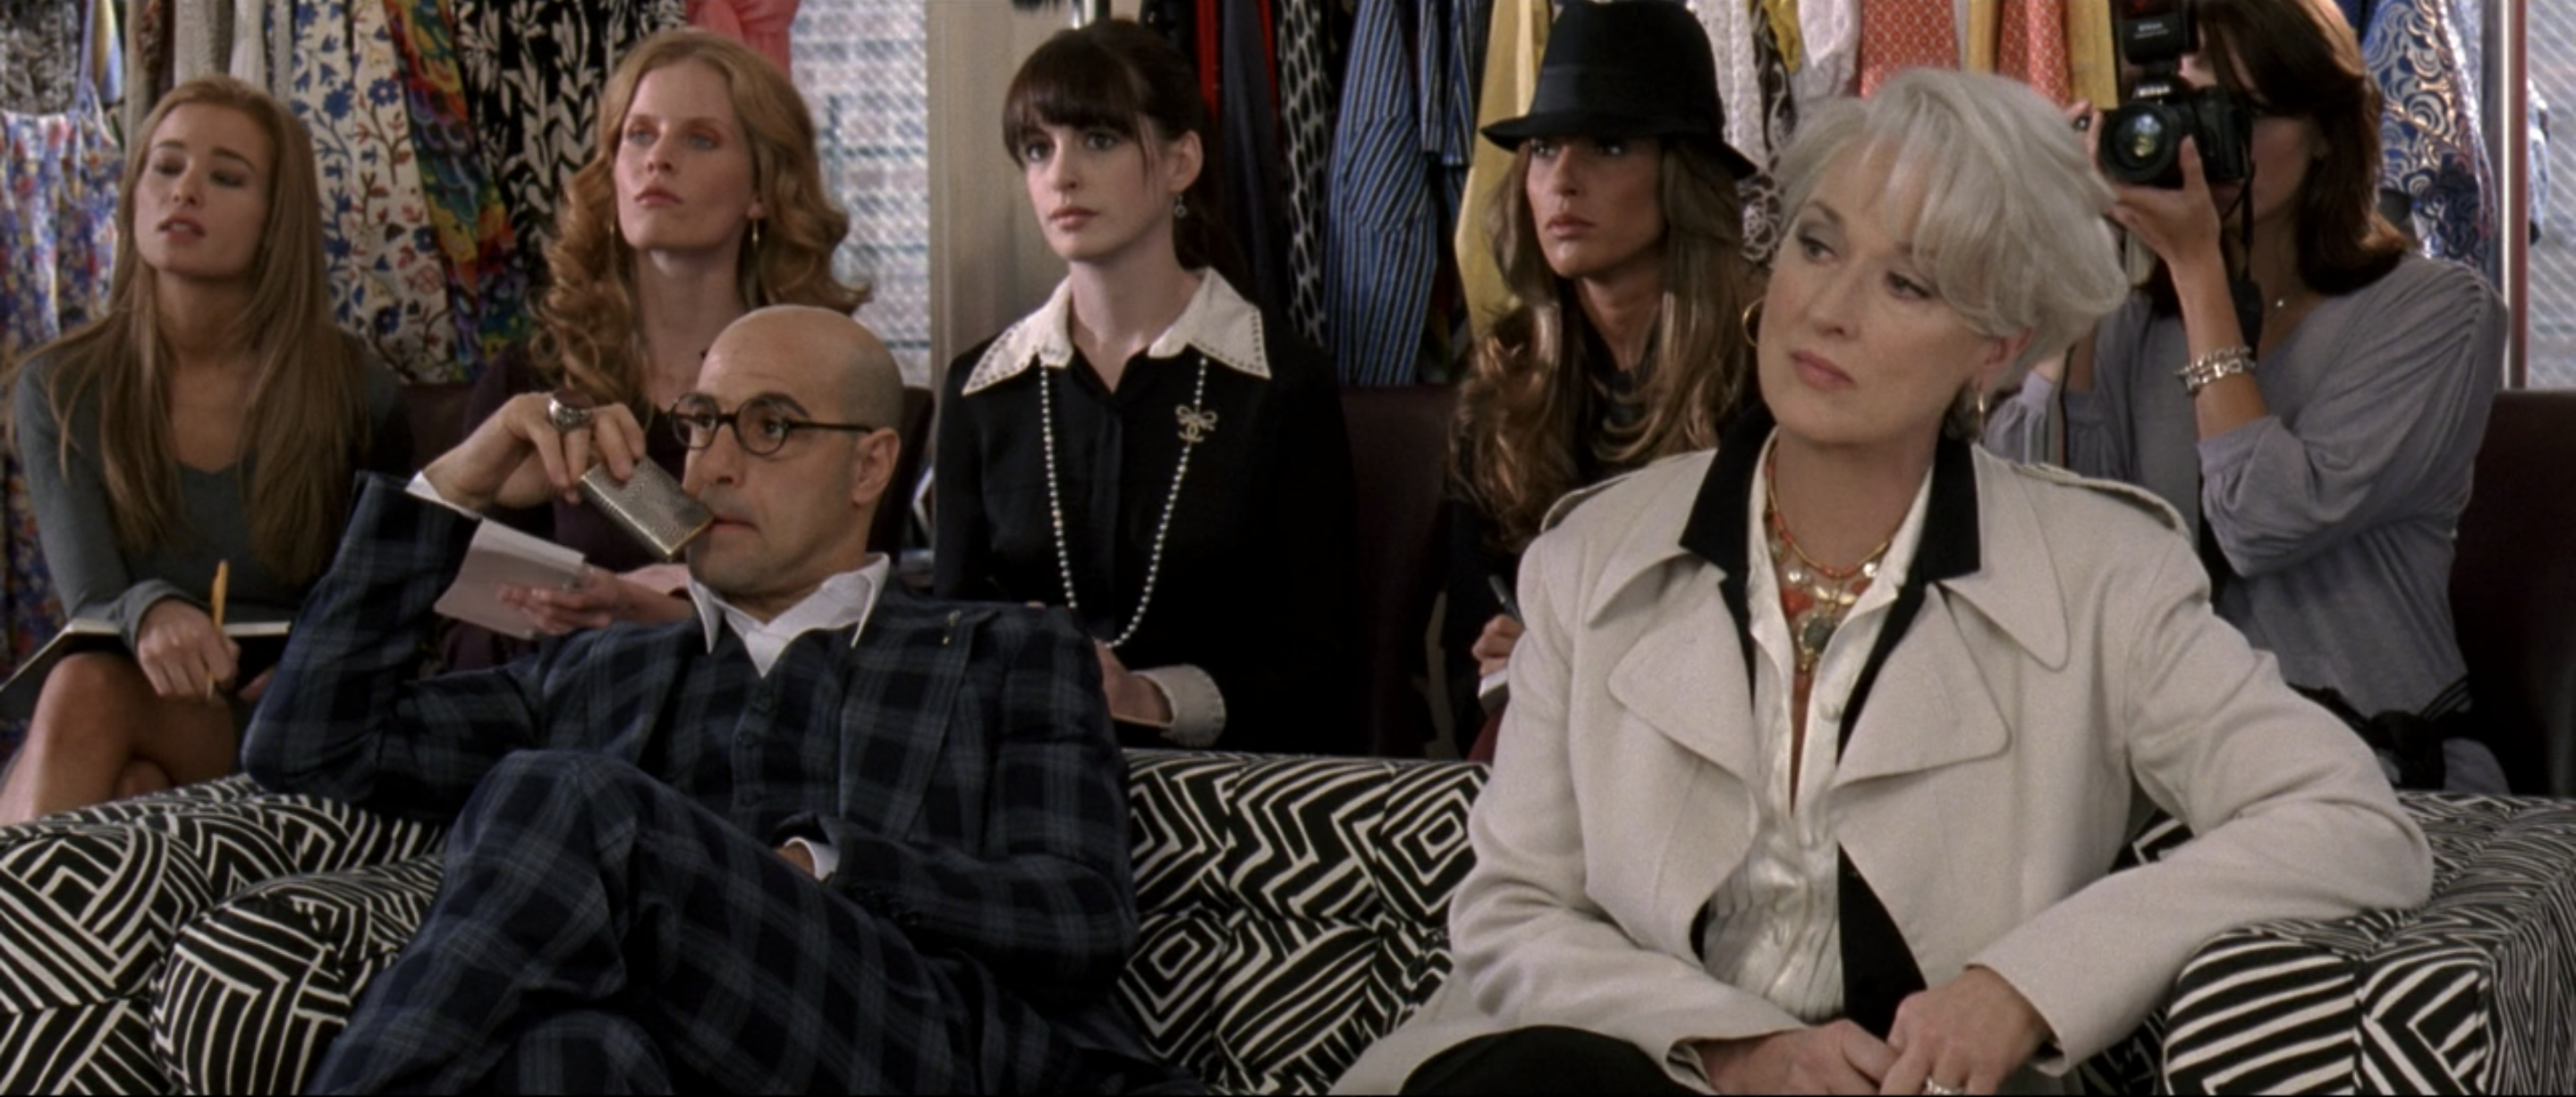 Stanley Tucci, Anne Hathaway, and Meryl Streep sitting during a scene in "The Devil Wears Prada."